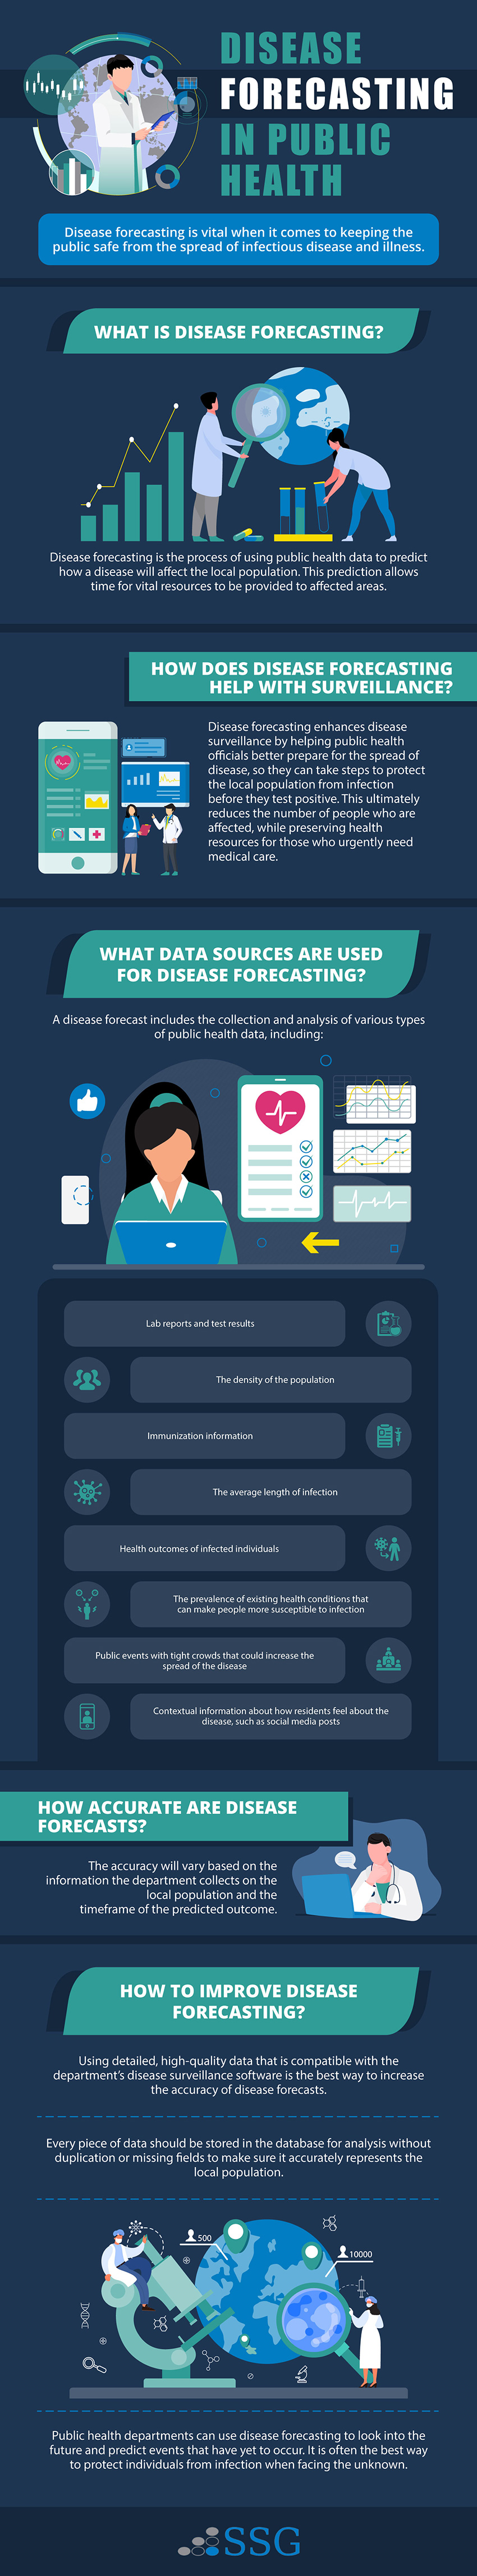 Disease Forecasting in Public Health Infographic